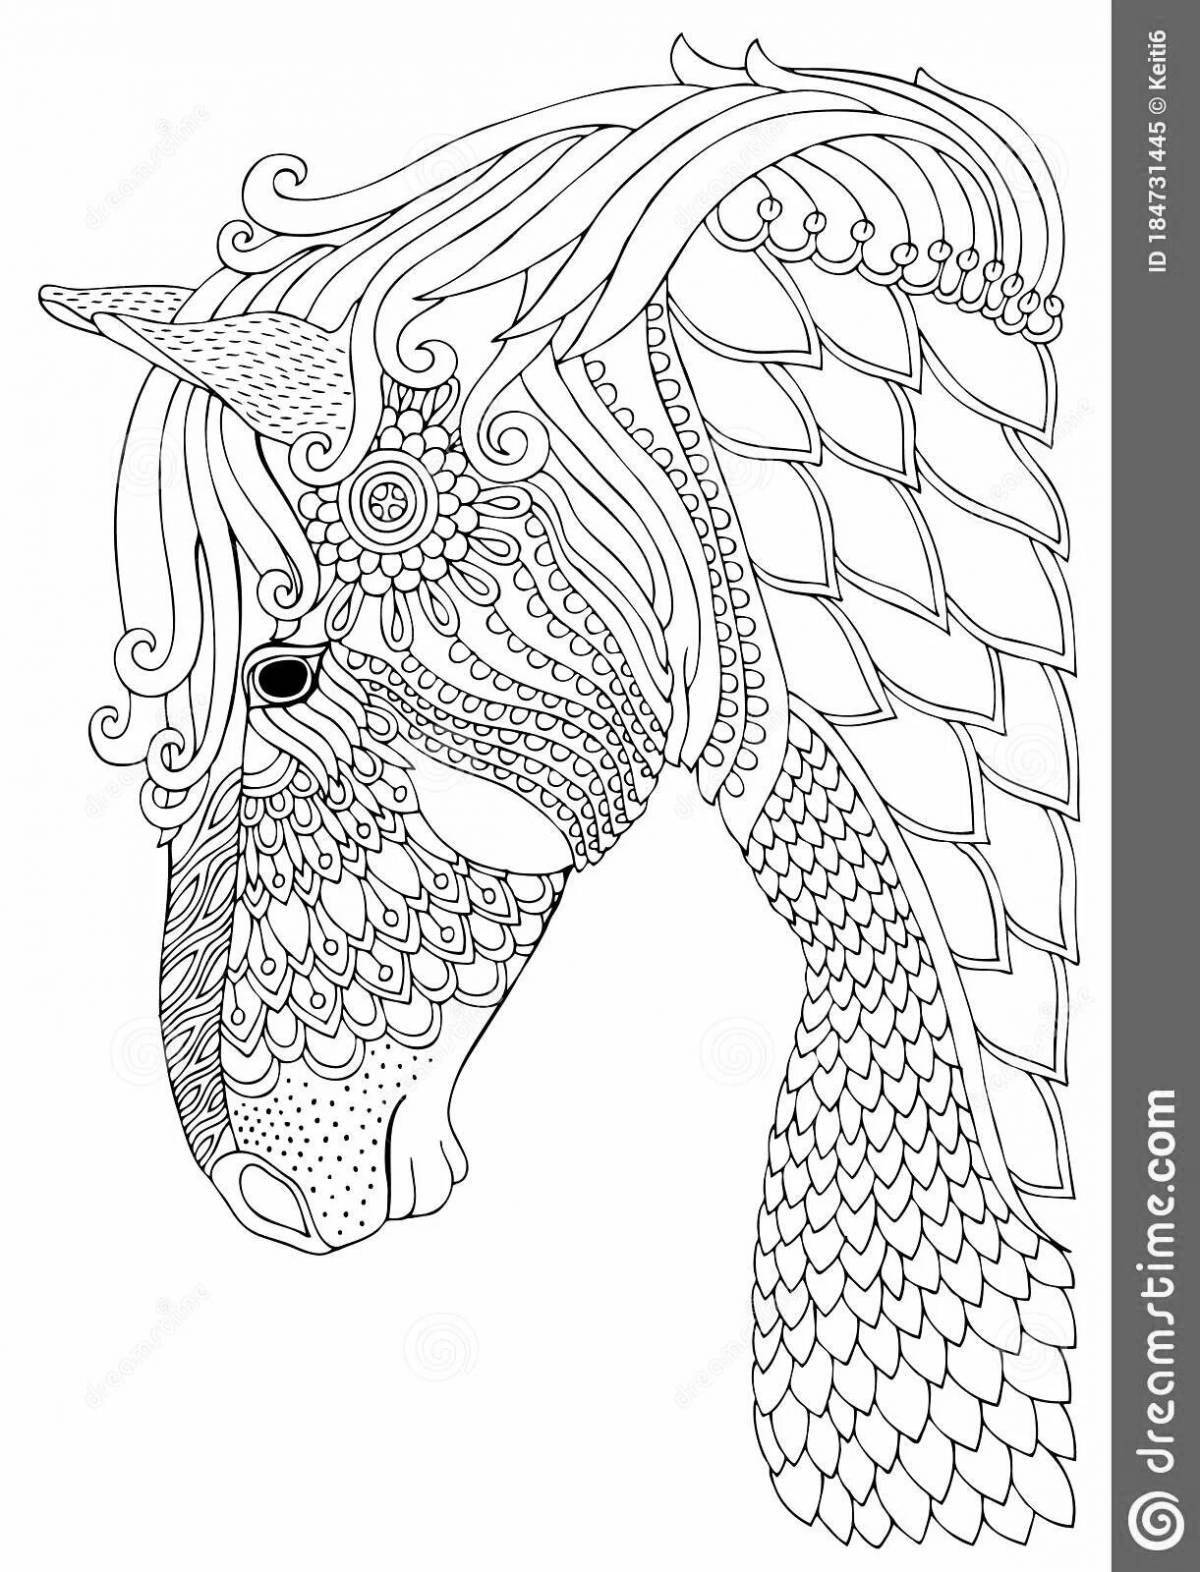 Exotic animal coloring pages for adults